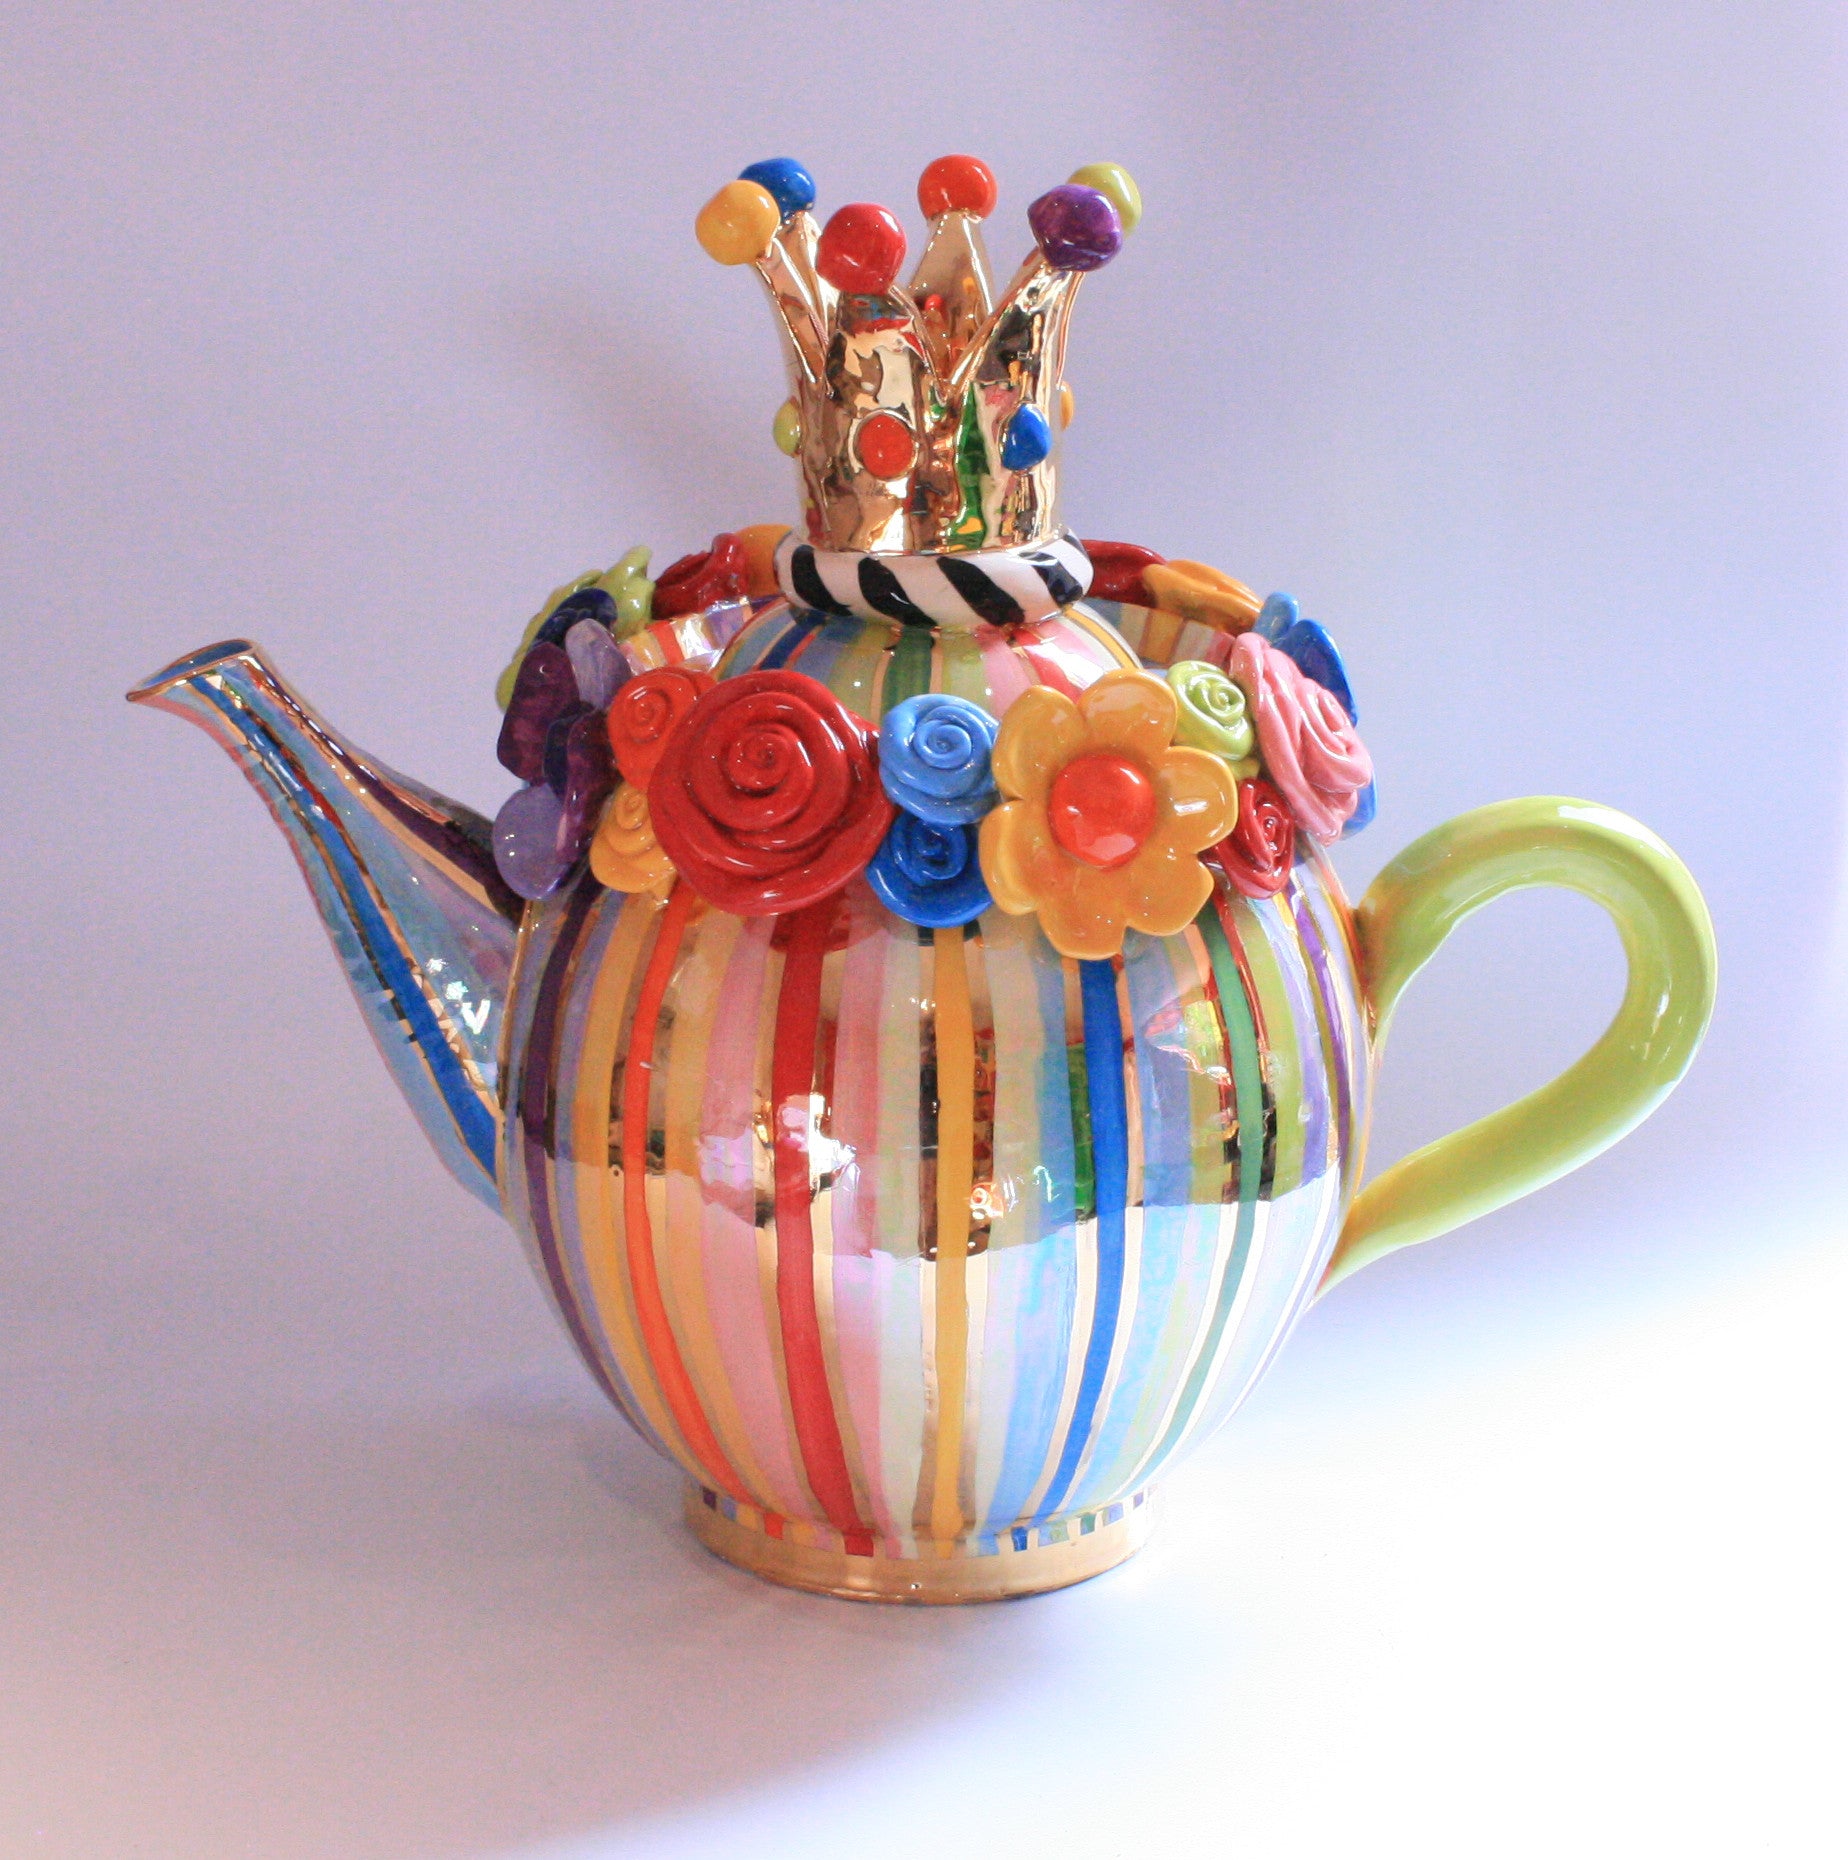 Giant Mad Hatters Teapot - MaryRoseYoung